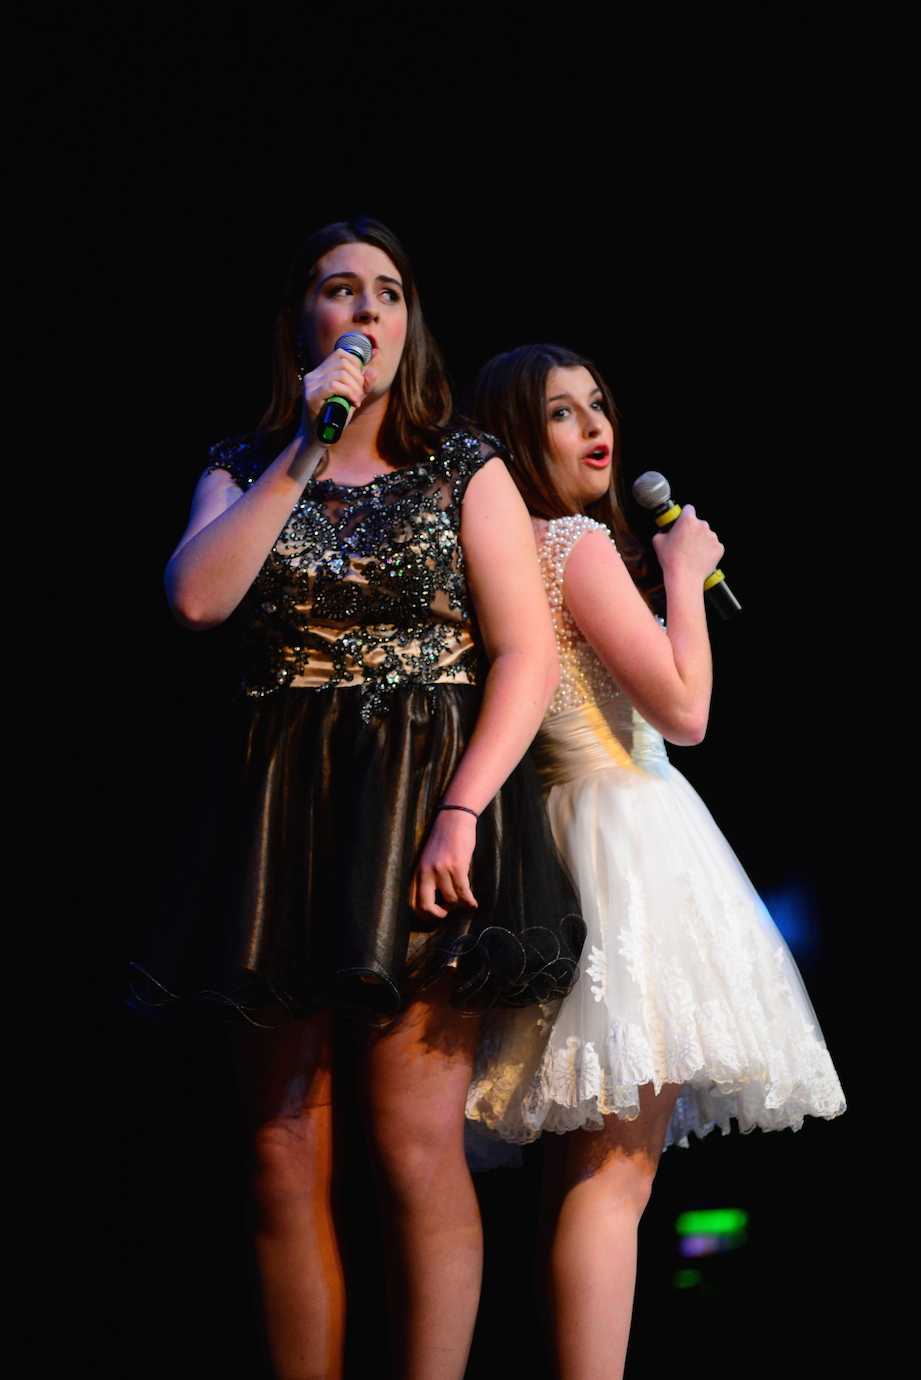 (photo courtesy of Mr. Hubert Worley) Sarah Kennedy Duncan and Madeleine Porter sing "What is This Feeling" from Wicked